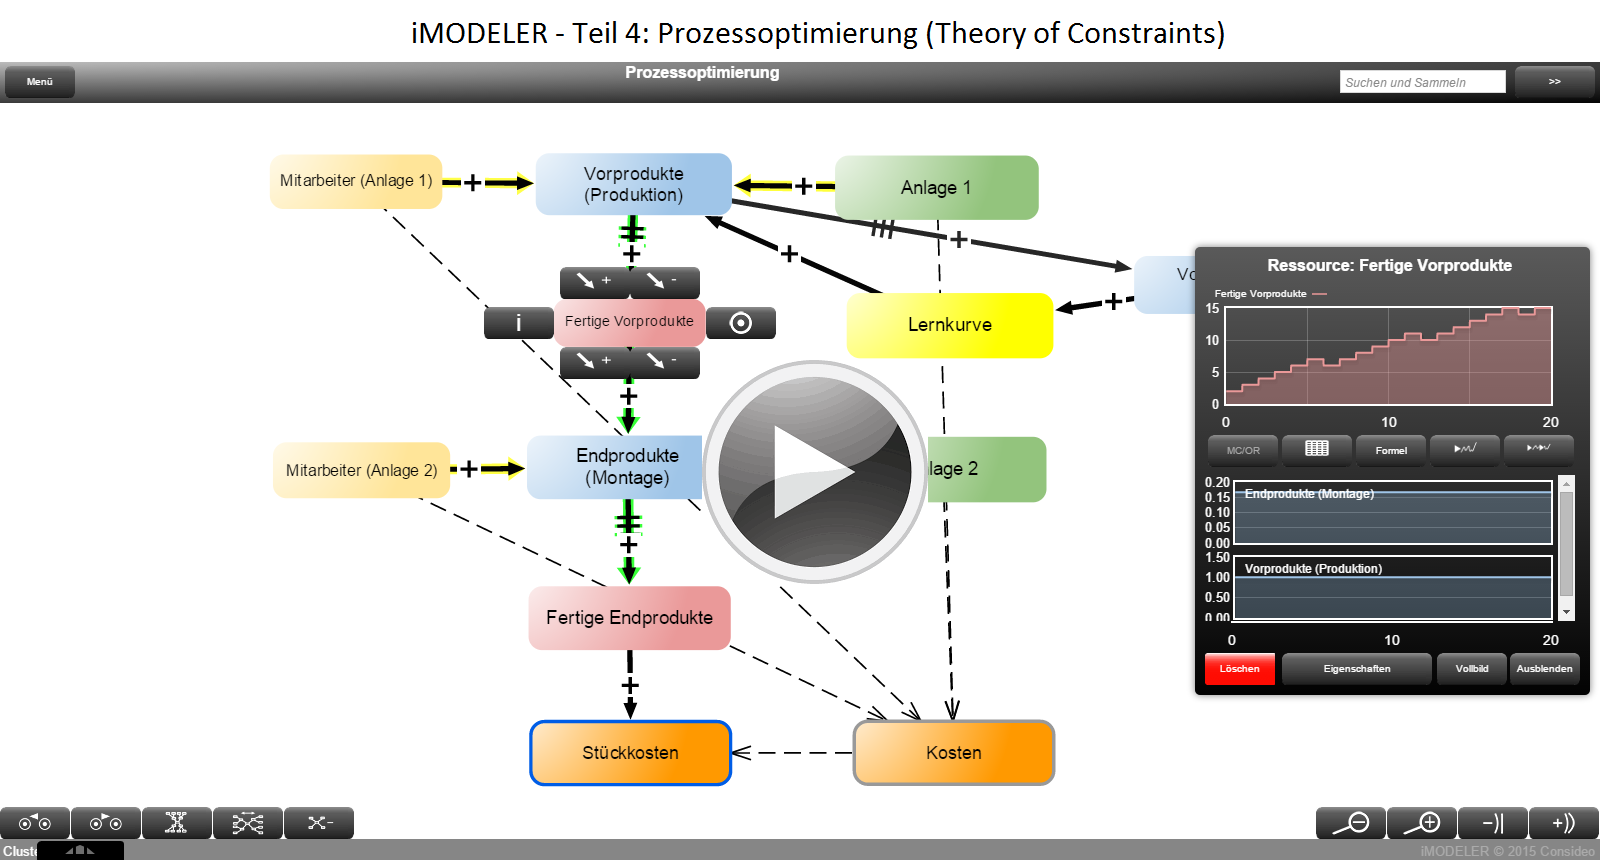 iMODELER: Prozessoptimierung (Theory of Constraints)